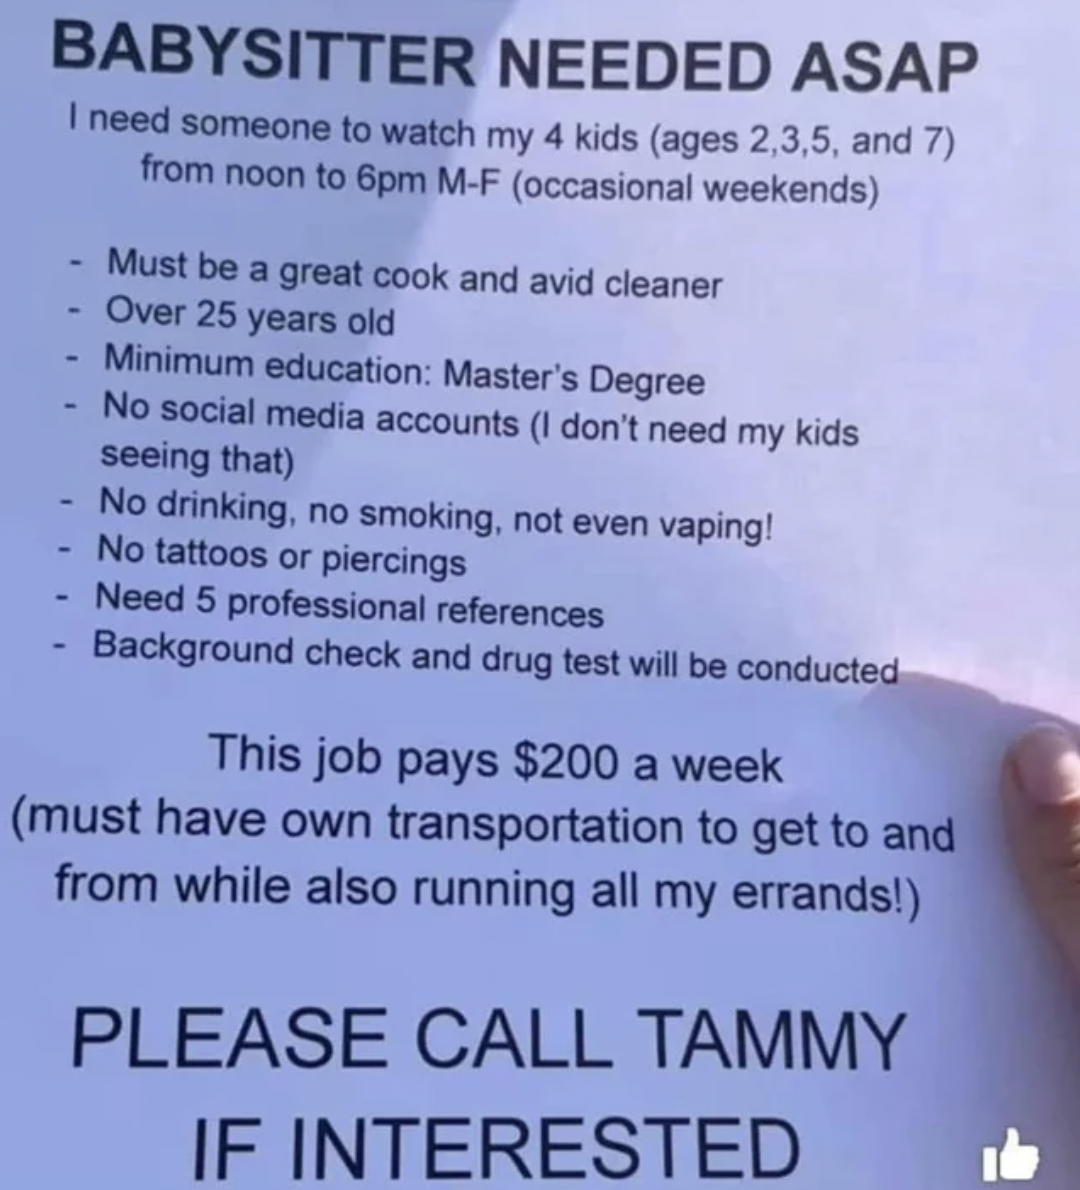 Fails and facepalms - document - Babysitter Needed Asap I need someone to watch my 4 kids ages 2,3,5, and 7 from noon to 6pm MF occasional weekends Must be a great cook and avid cleaner Over 25 years old Minimum education Master's Degree No social media a